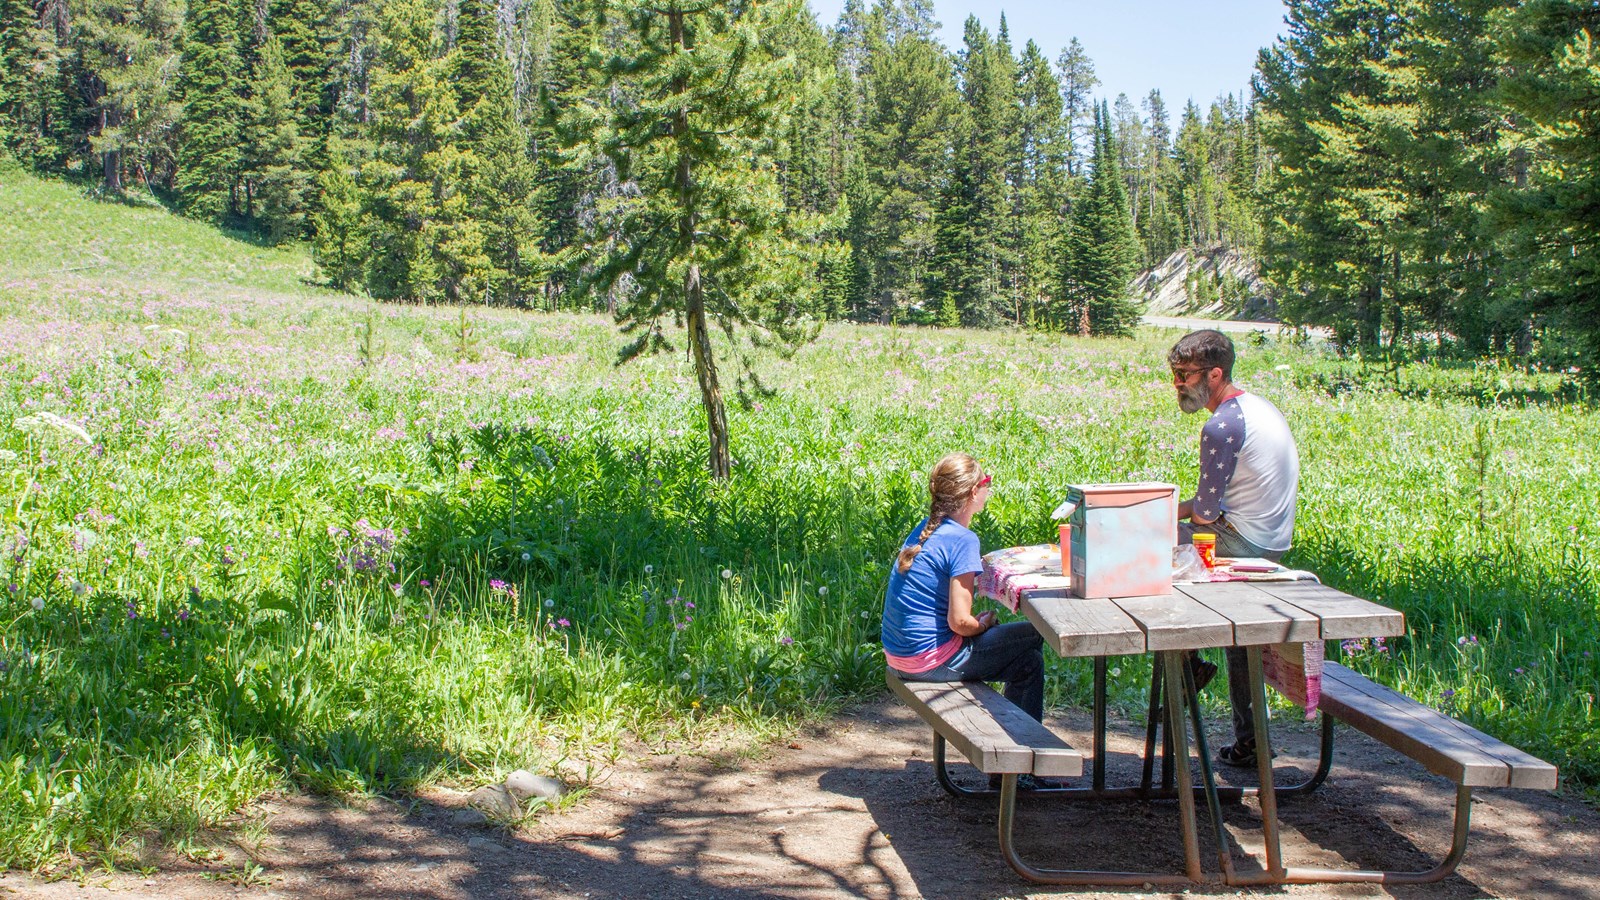 Two people picnicking at a table in front of a meadow.